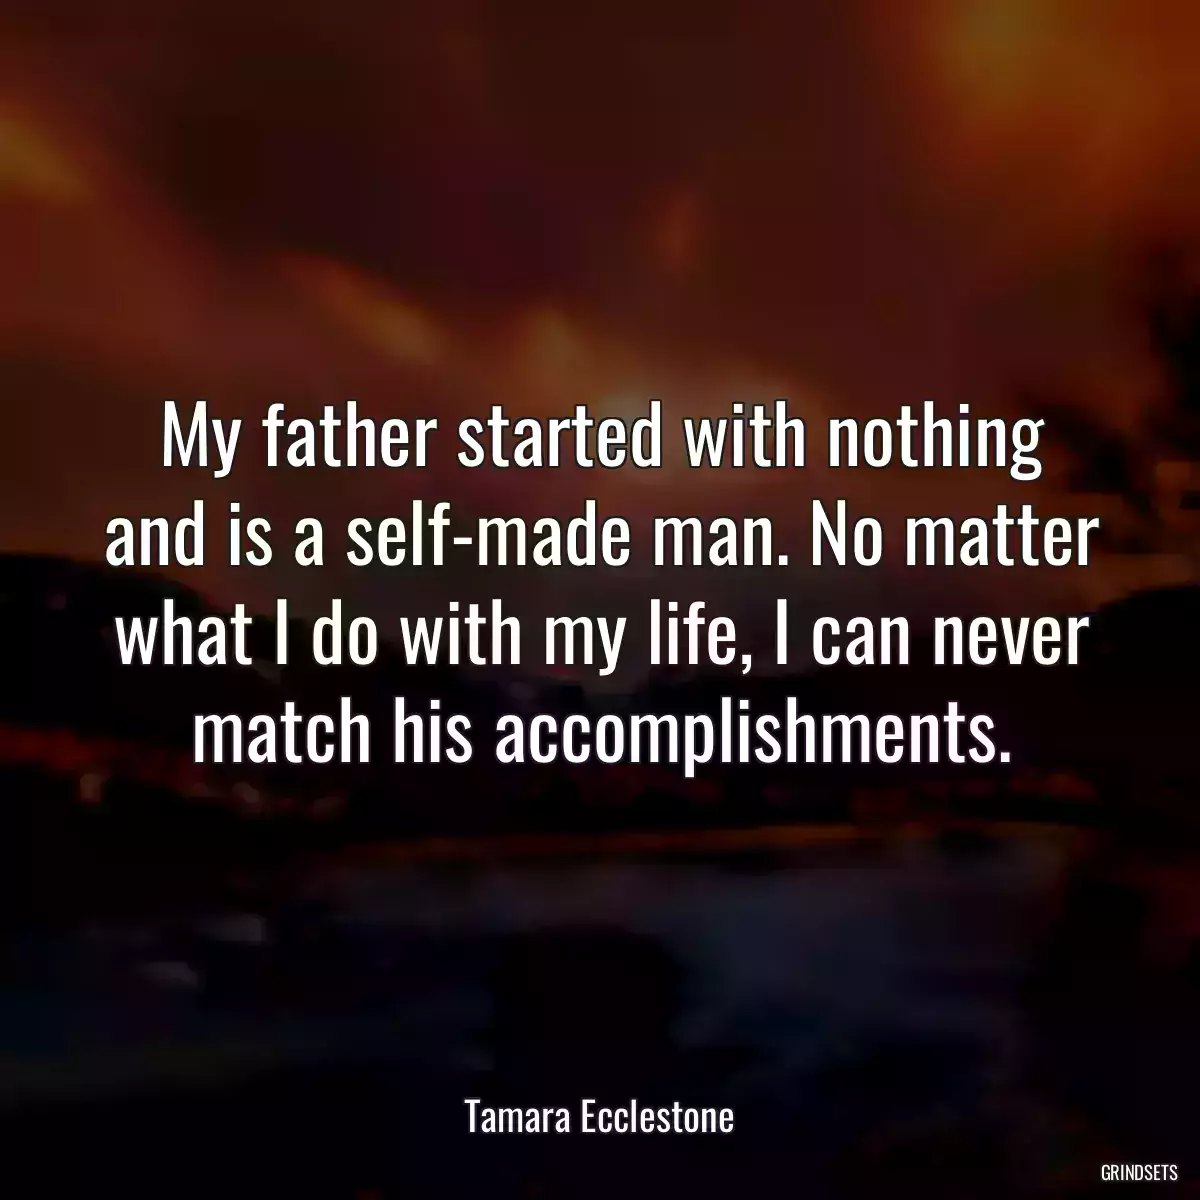 My father started with nothing and is a self-made man. No matter what I do with my life, I can never match his accomplishments.